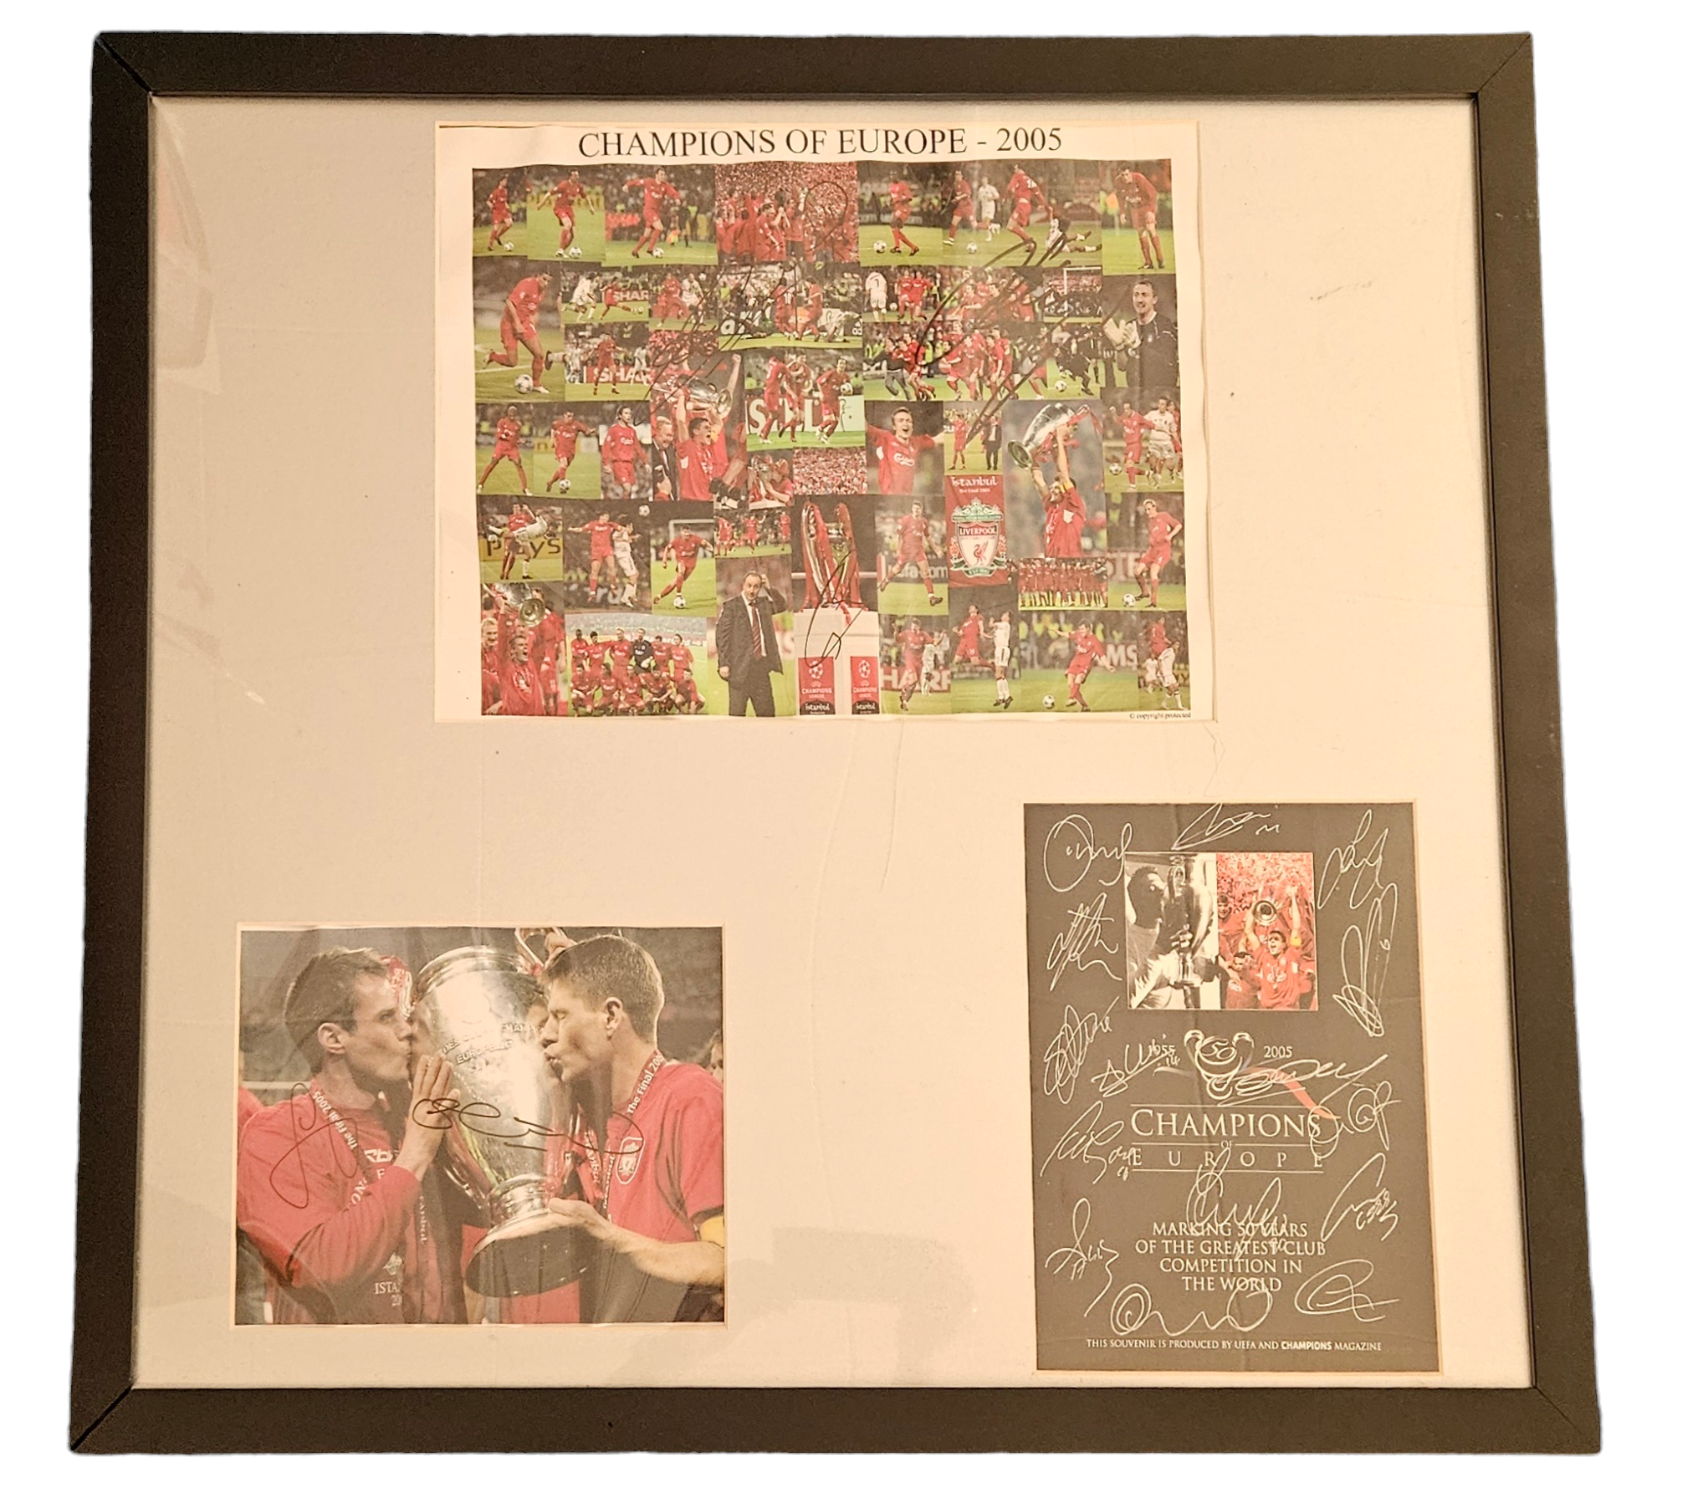 Football Superb Liverpool Multi Signed Champions of Europe - 2005 Presentation Display in Black